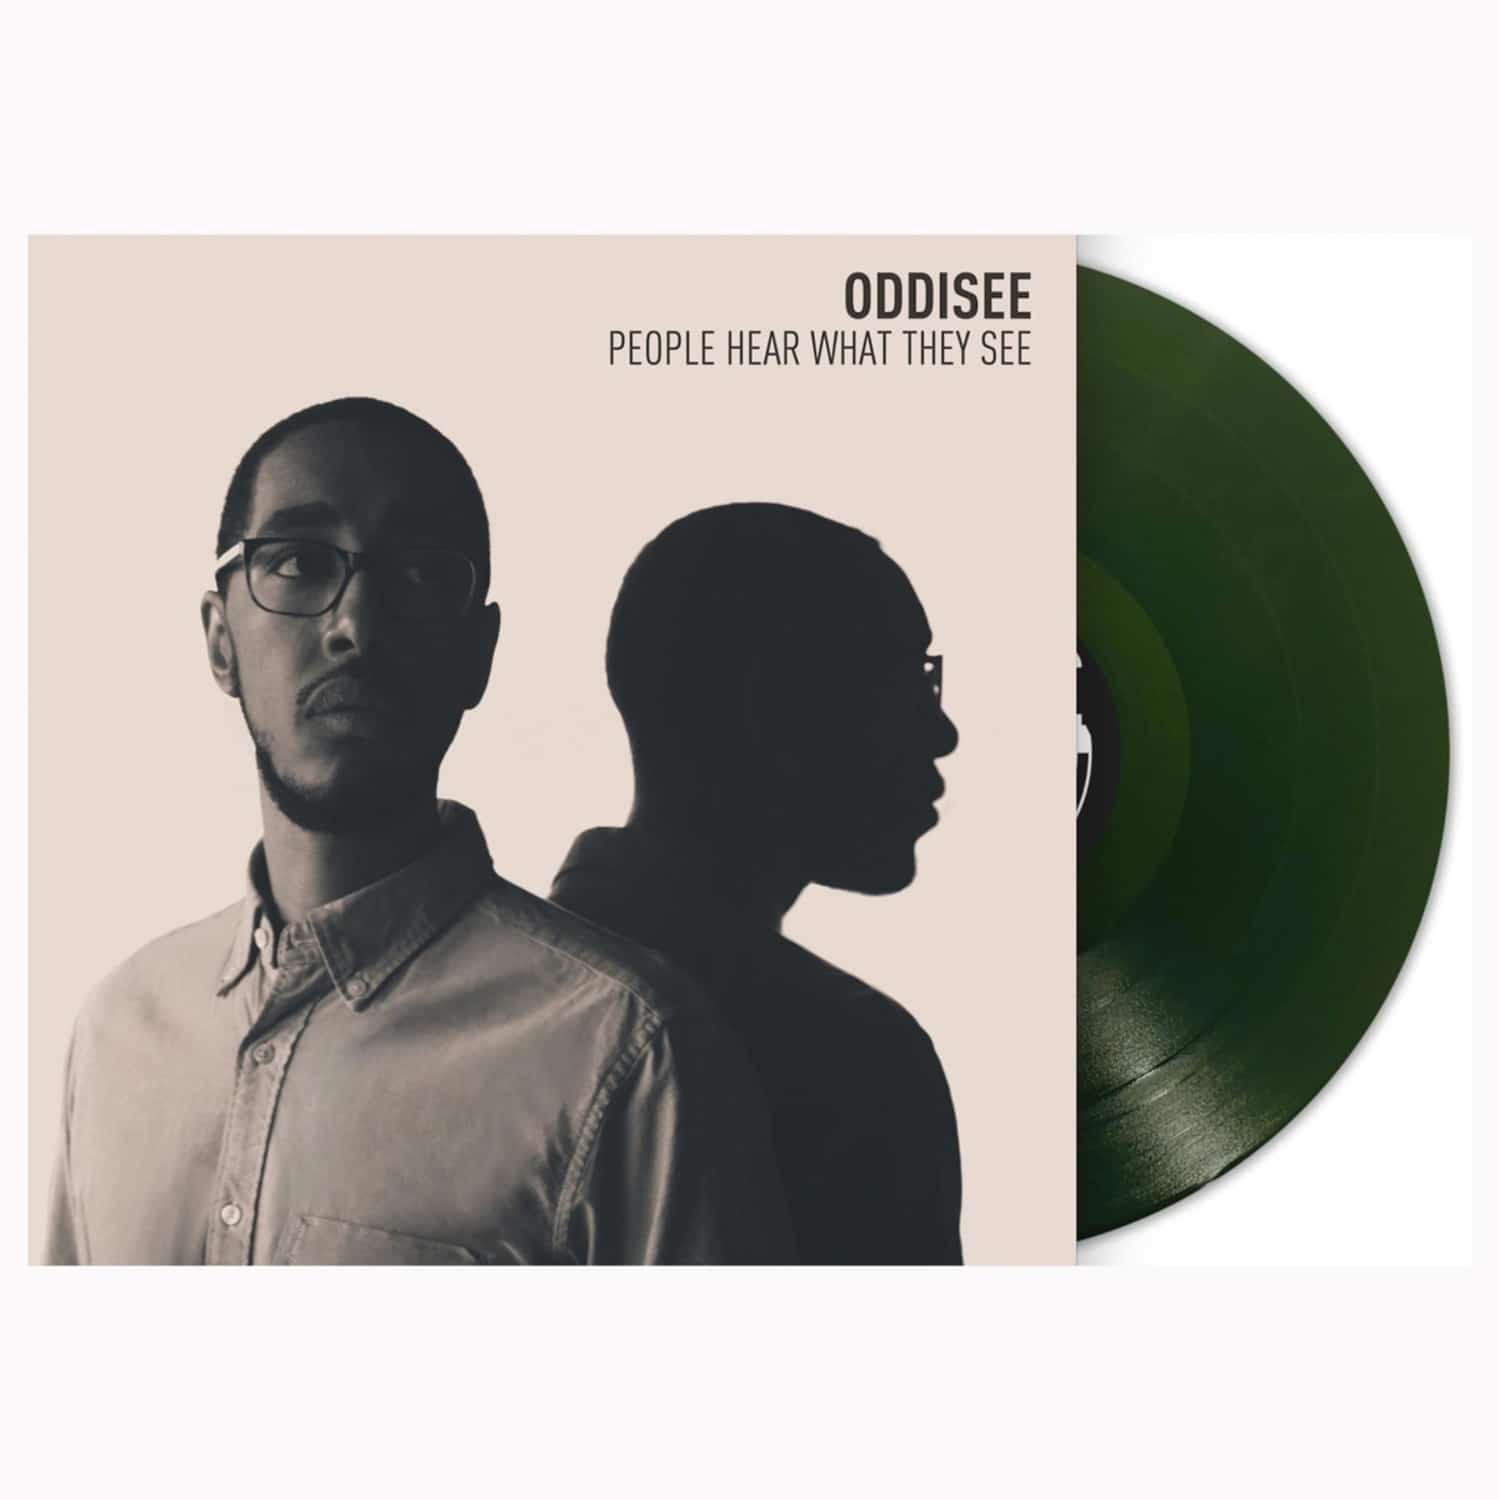 Oddisee - PEOPLE HEAR WHAT THEY SEE 